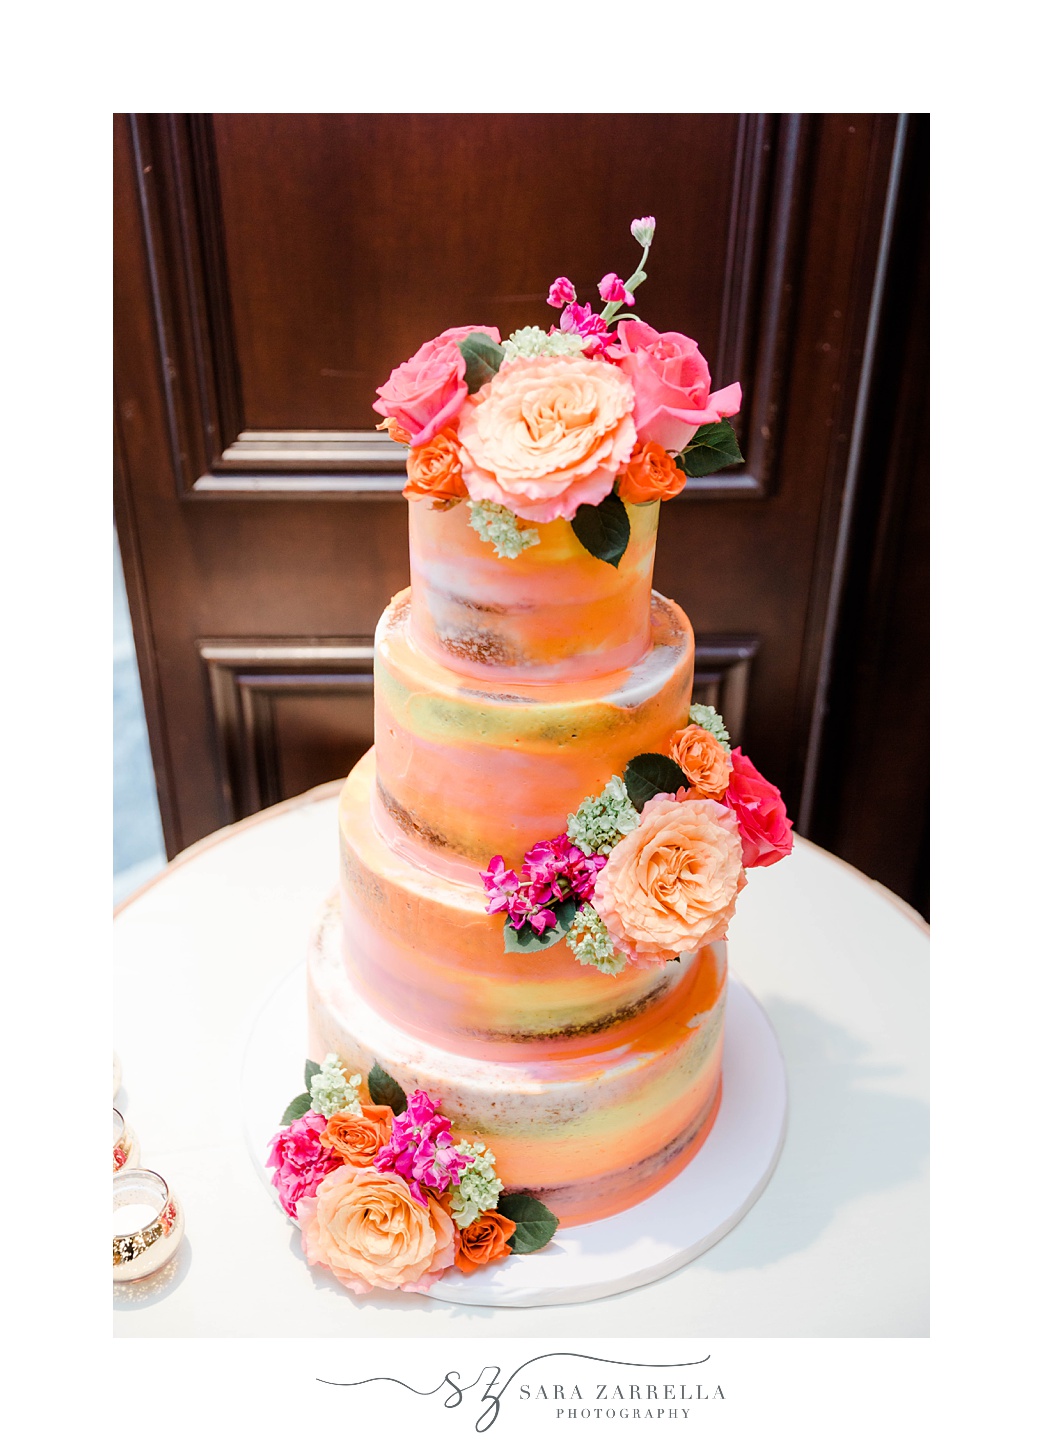 tiered wedding cake with pink and orange flowers at Quidnessett Country Club